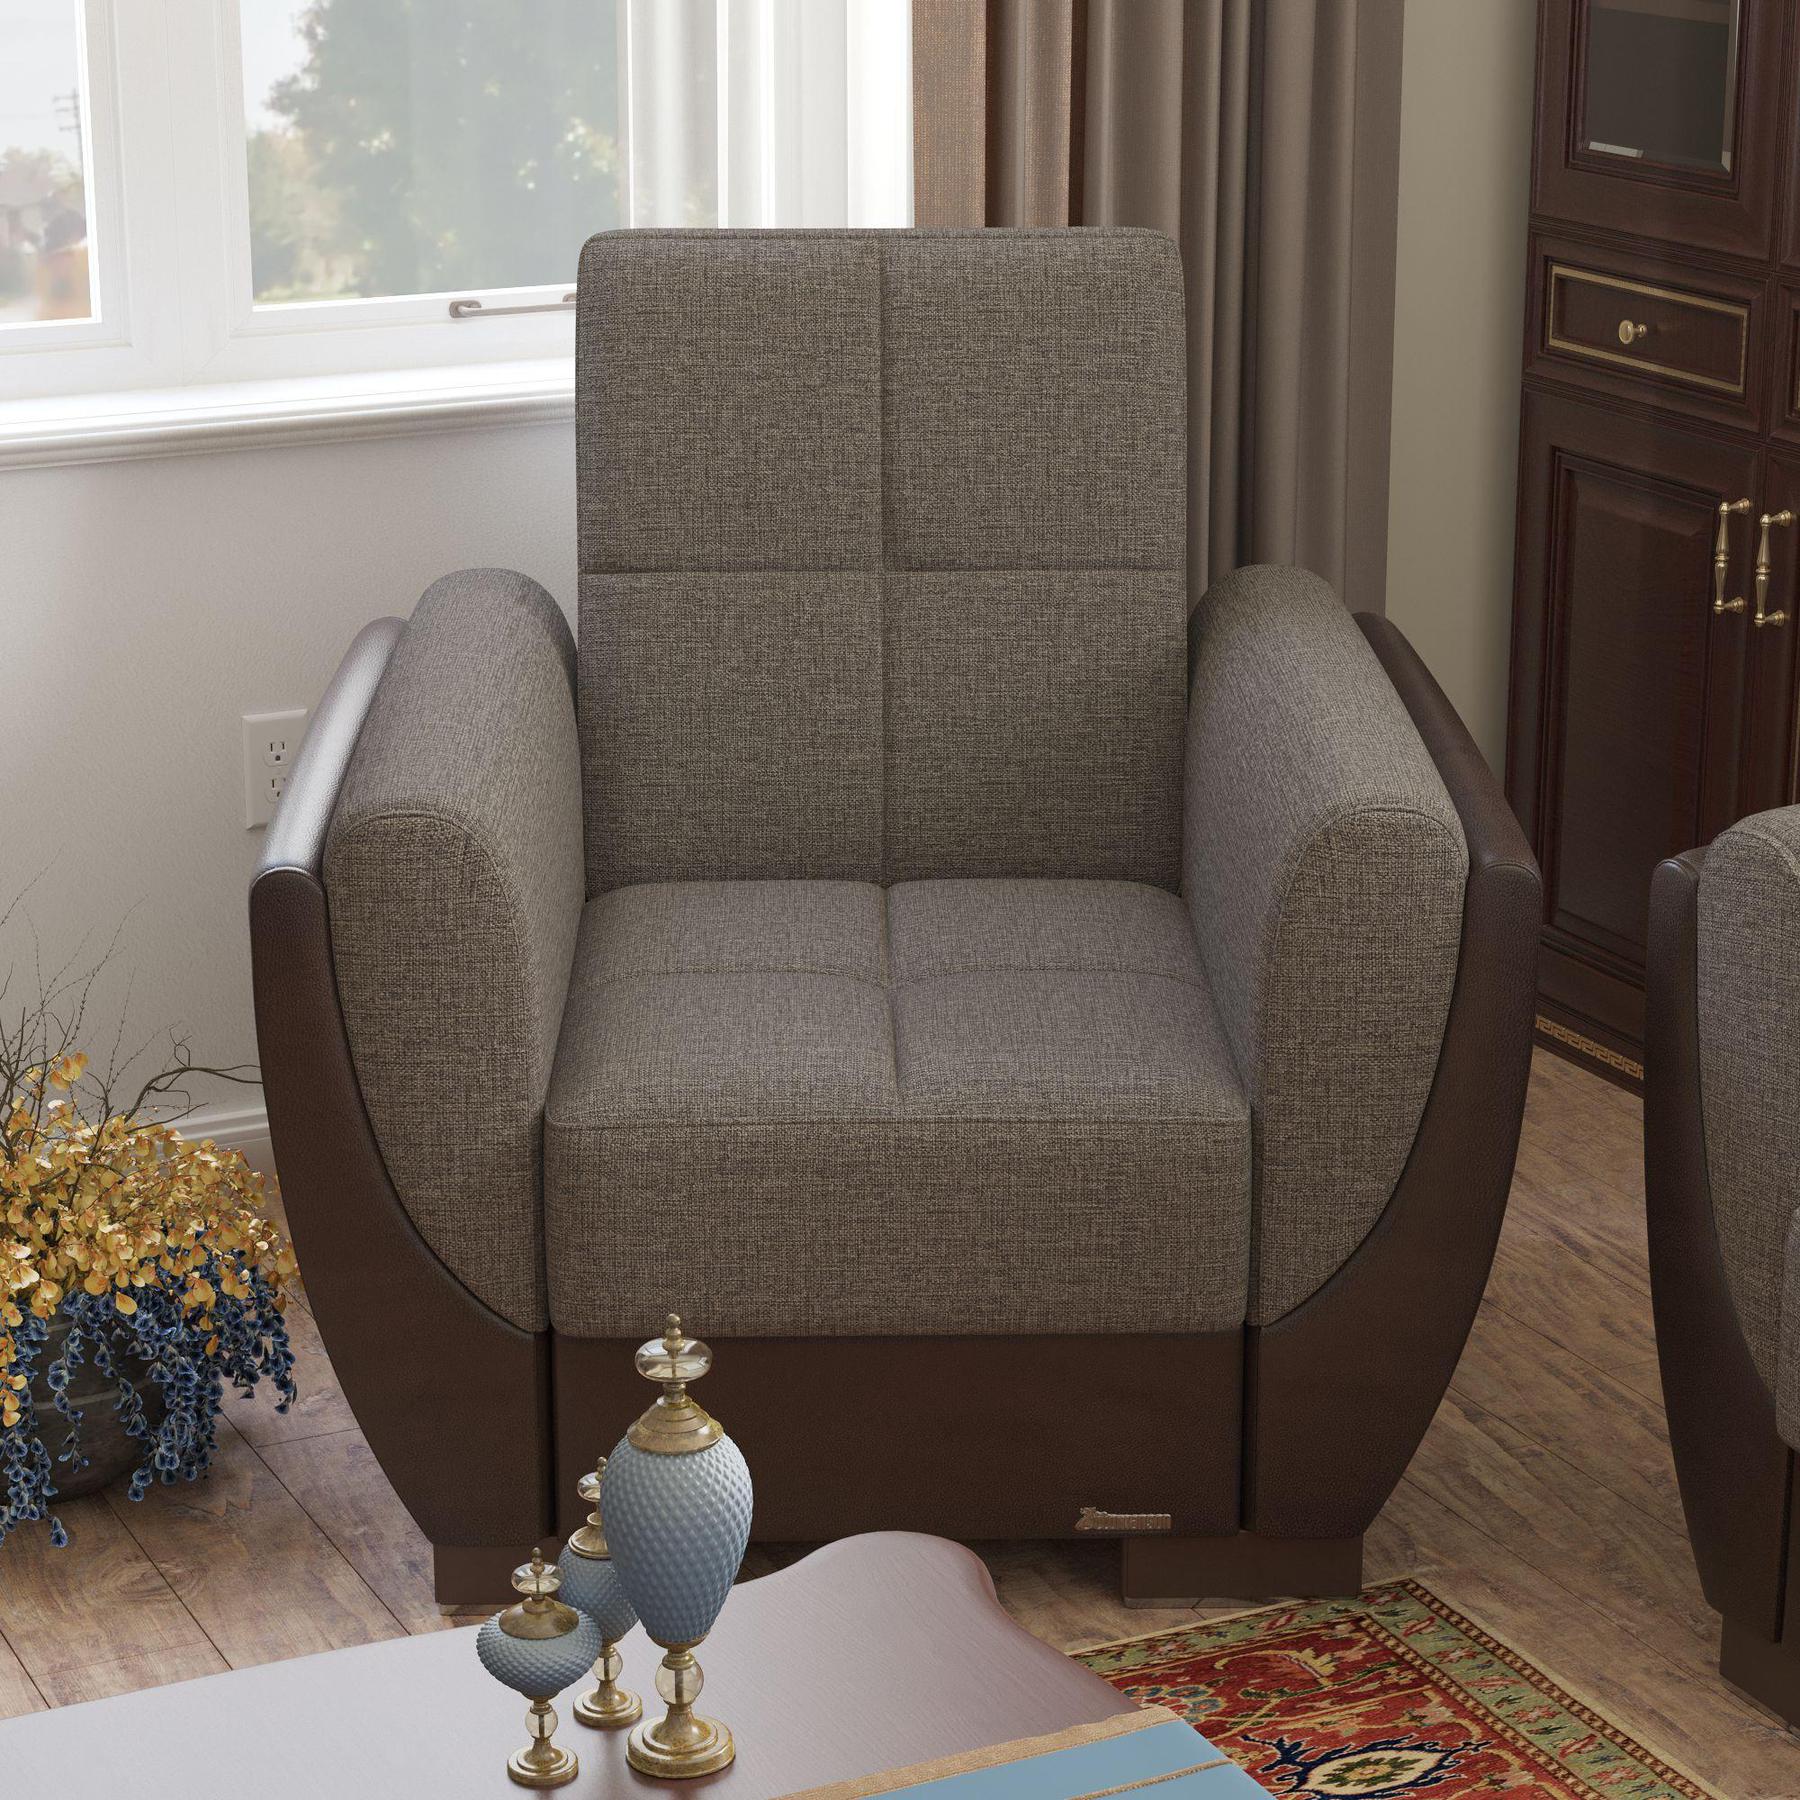 Modern design, Tannin Brown, Dark Brown , Chenille, Artificial Leather upholstered convertible Armchair with underseat storage from Voyage Shelter by Ottomanson in living room lifestyle setting by itself. This Armchair measures 42 inches width by 36 inches depth by 41 inches height.